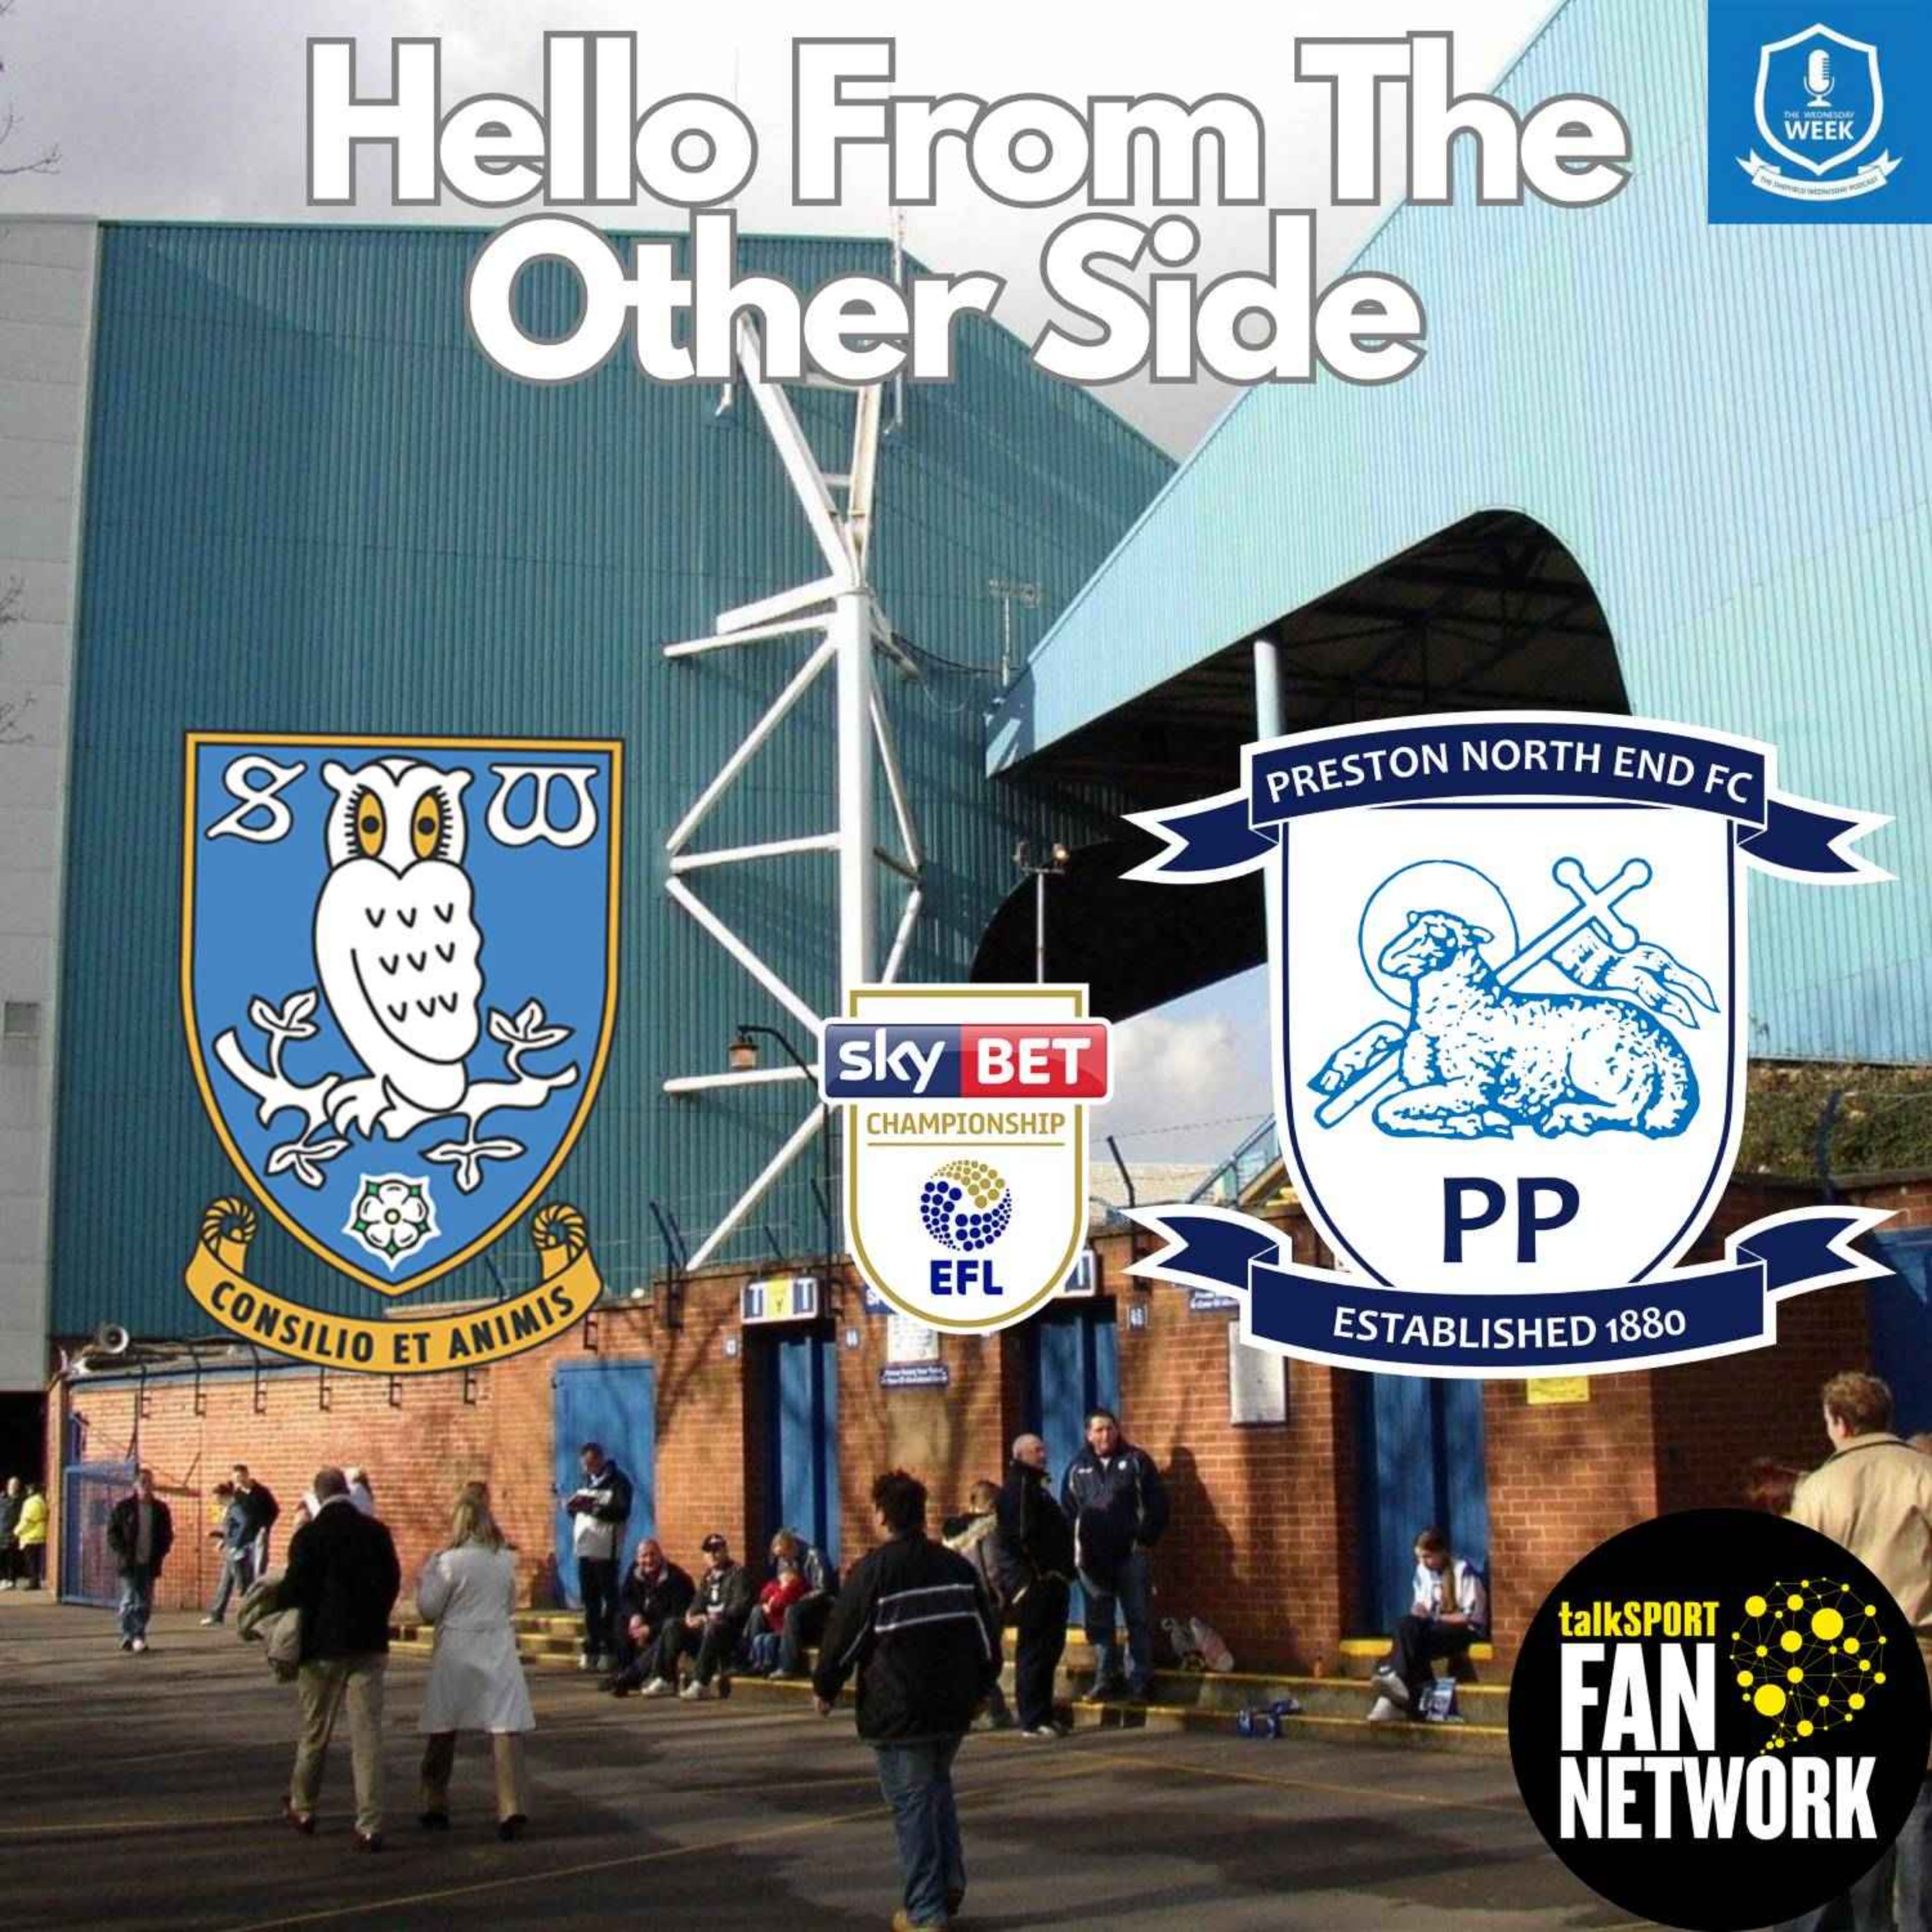 Hello From the Other Side - Preston North End